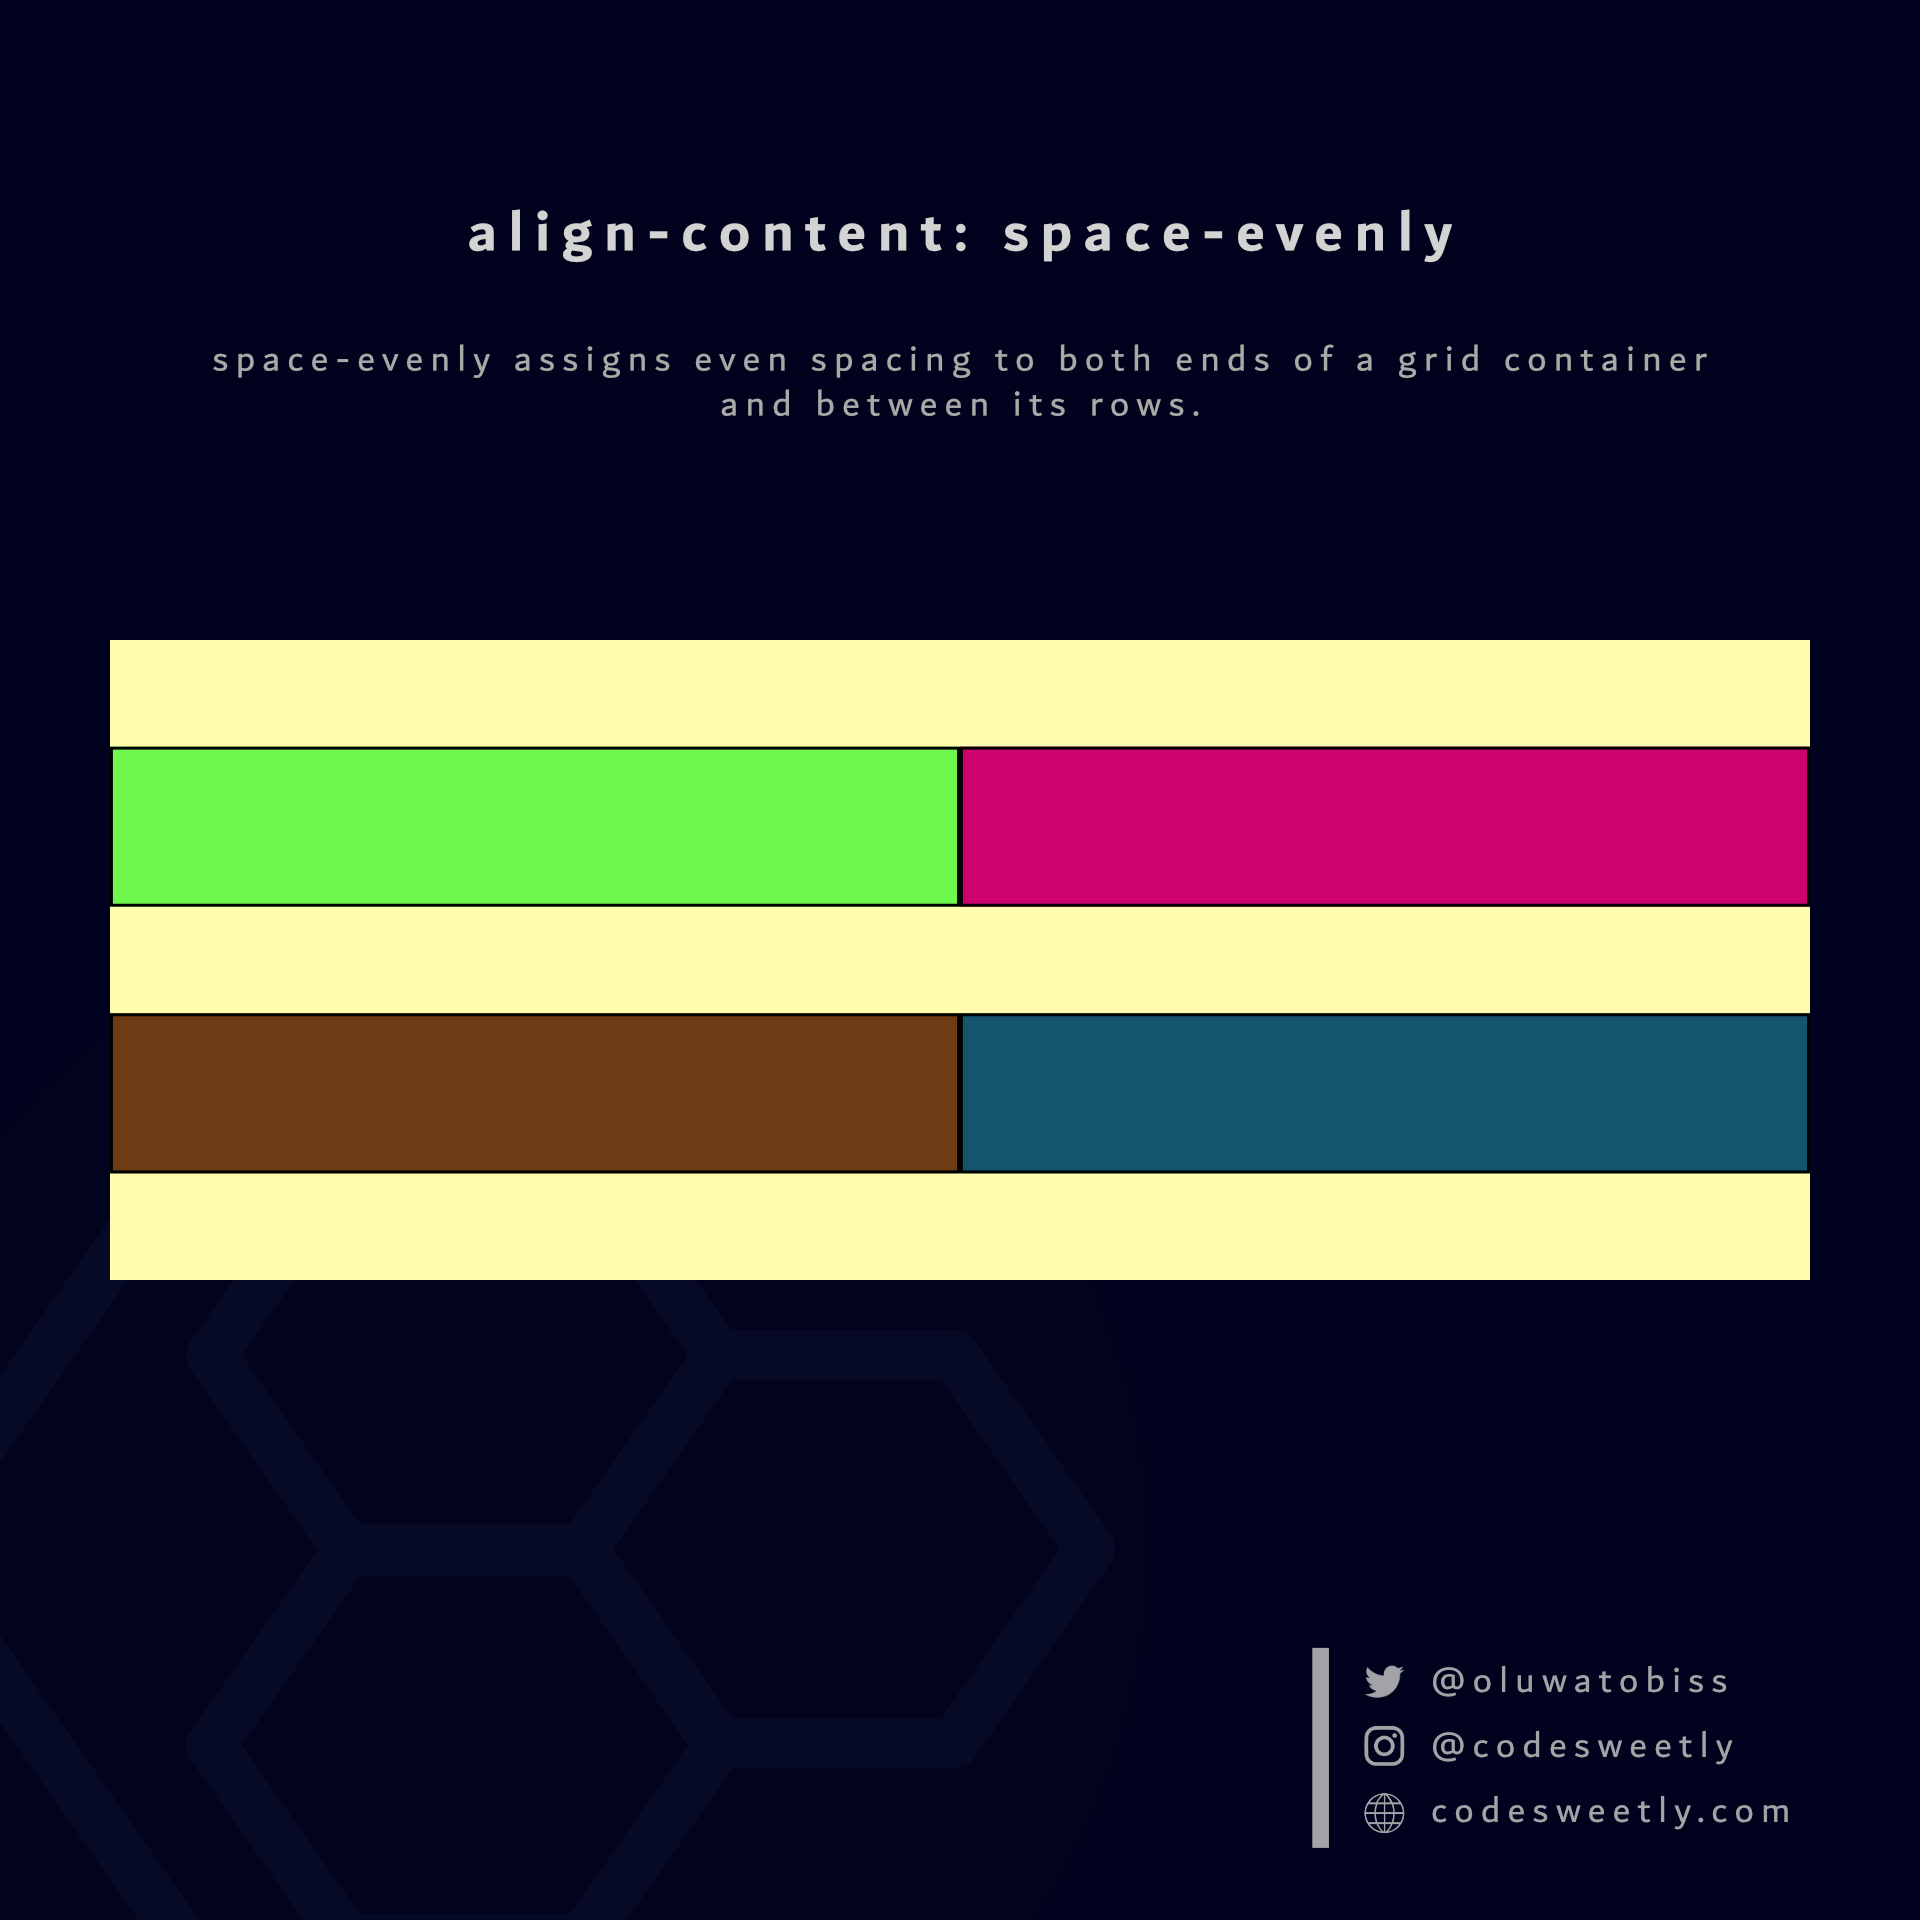 Illustration of align-content&#39;s space-evenly value in CSS Grid